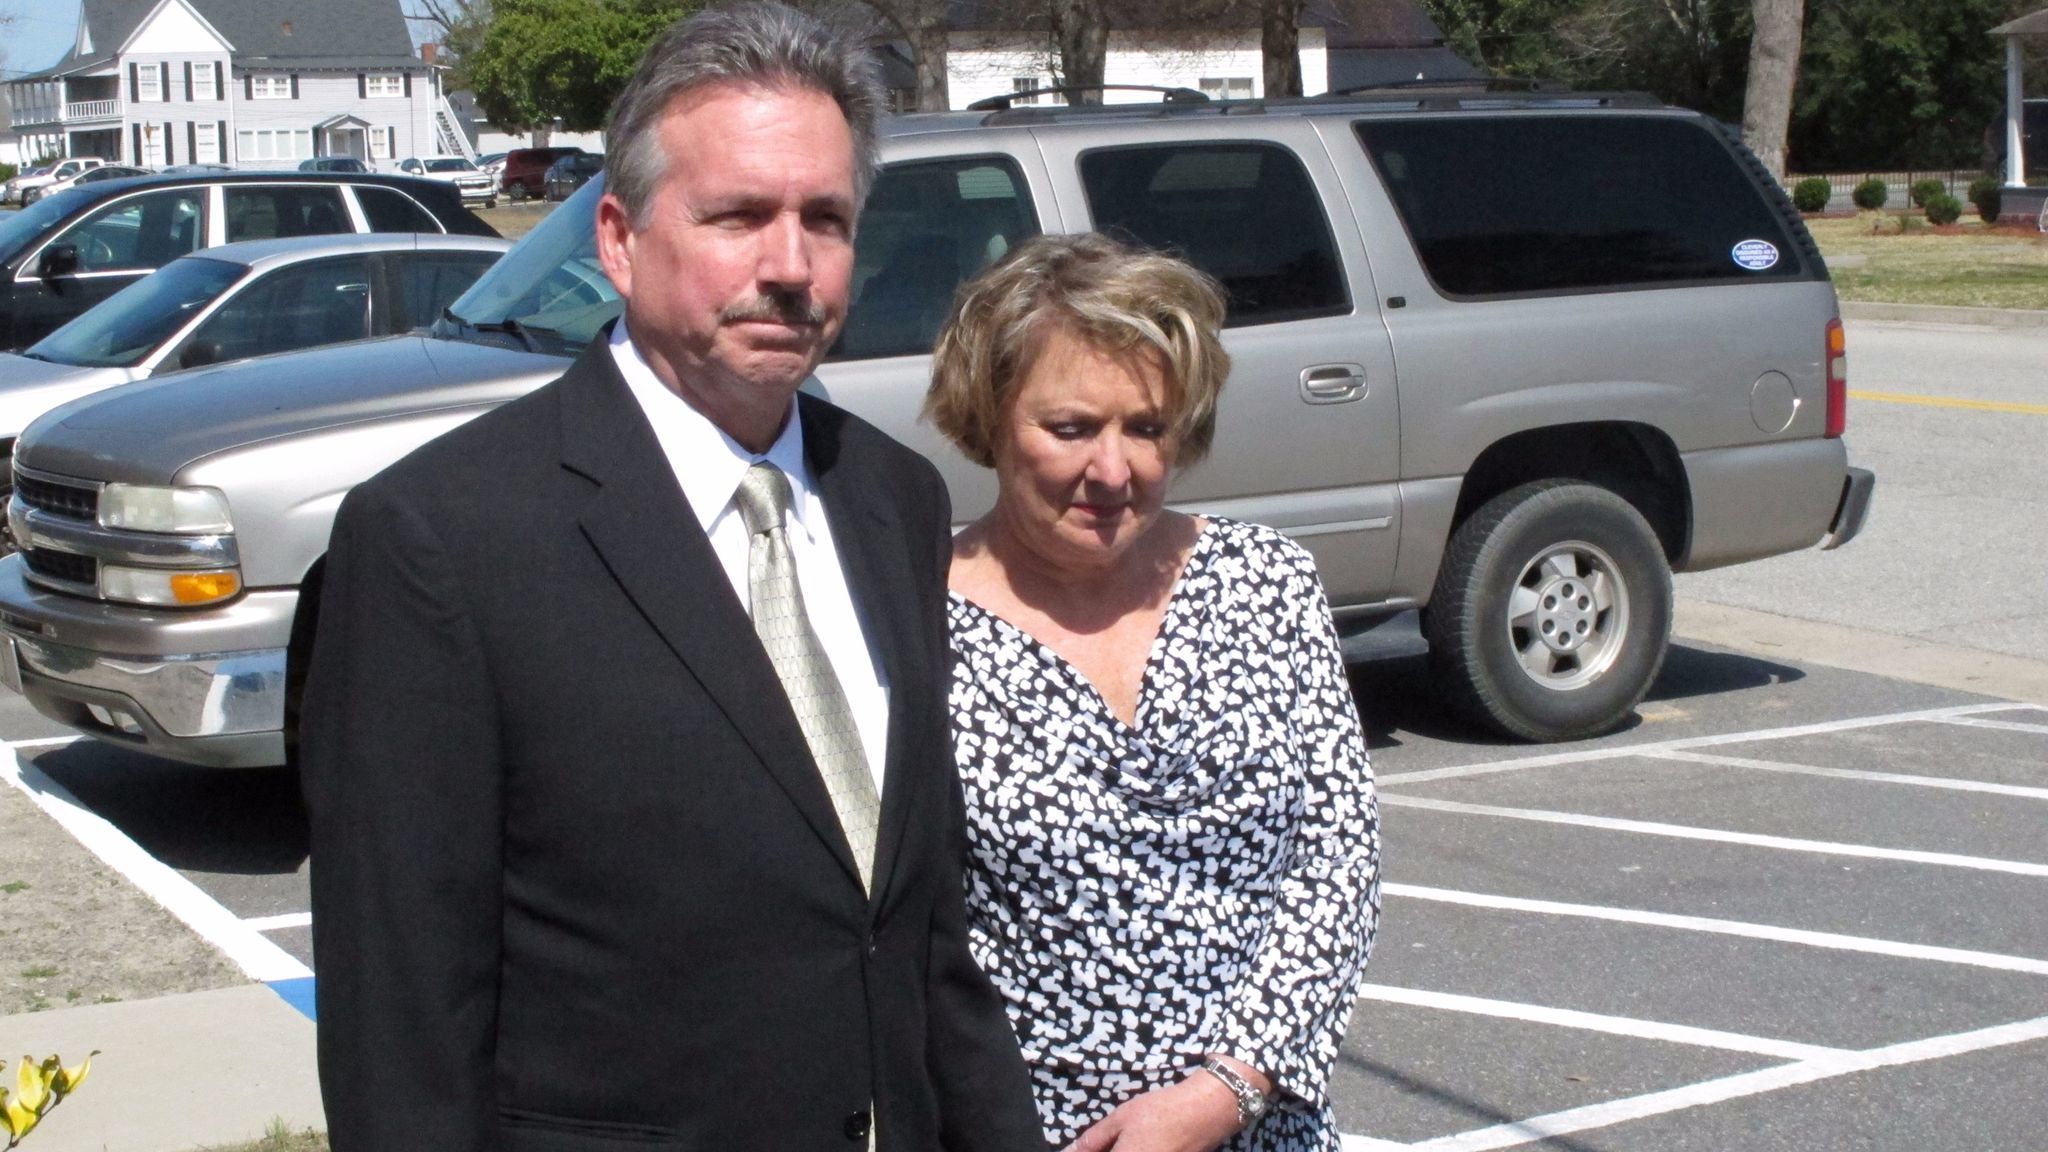 Richard and Elizabeth Jones, whose daughter, Sarah, was killed by a train on a Georgia movie set in 2014, met with reporters outside the Wayne County Courthouse in Jesup, Ga., the following year.